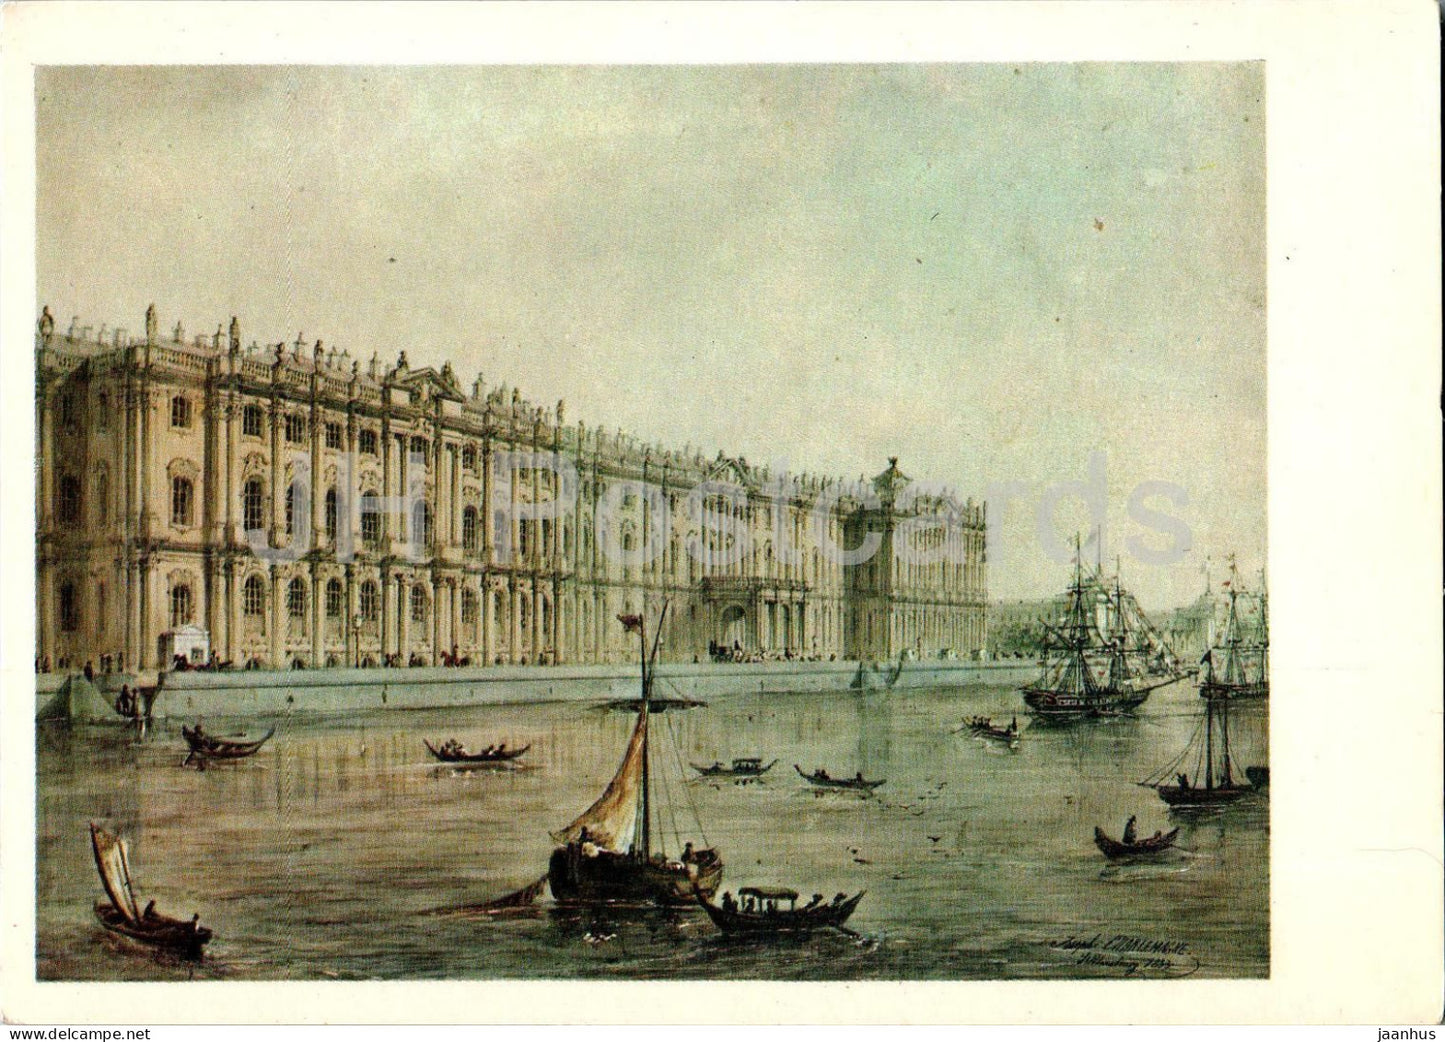 Leningrad - St Petersburg - Winter Palace - View from Neva river - painting by Charlemagne - 1975 - Russia USSR - unused - JH Postcards